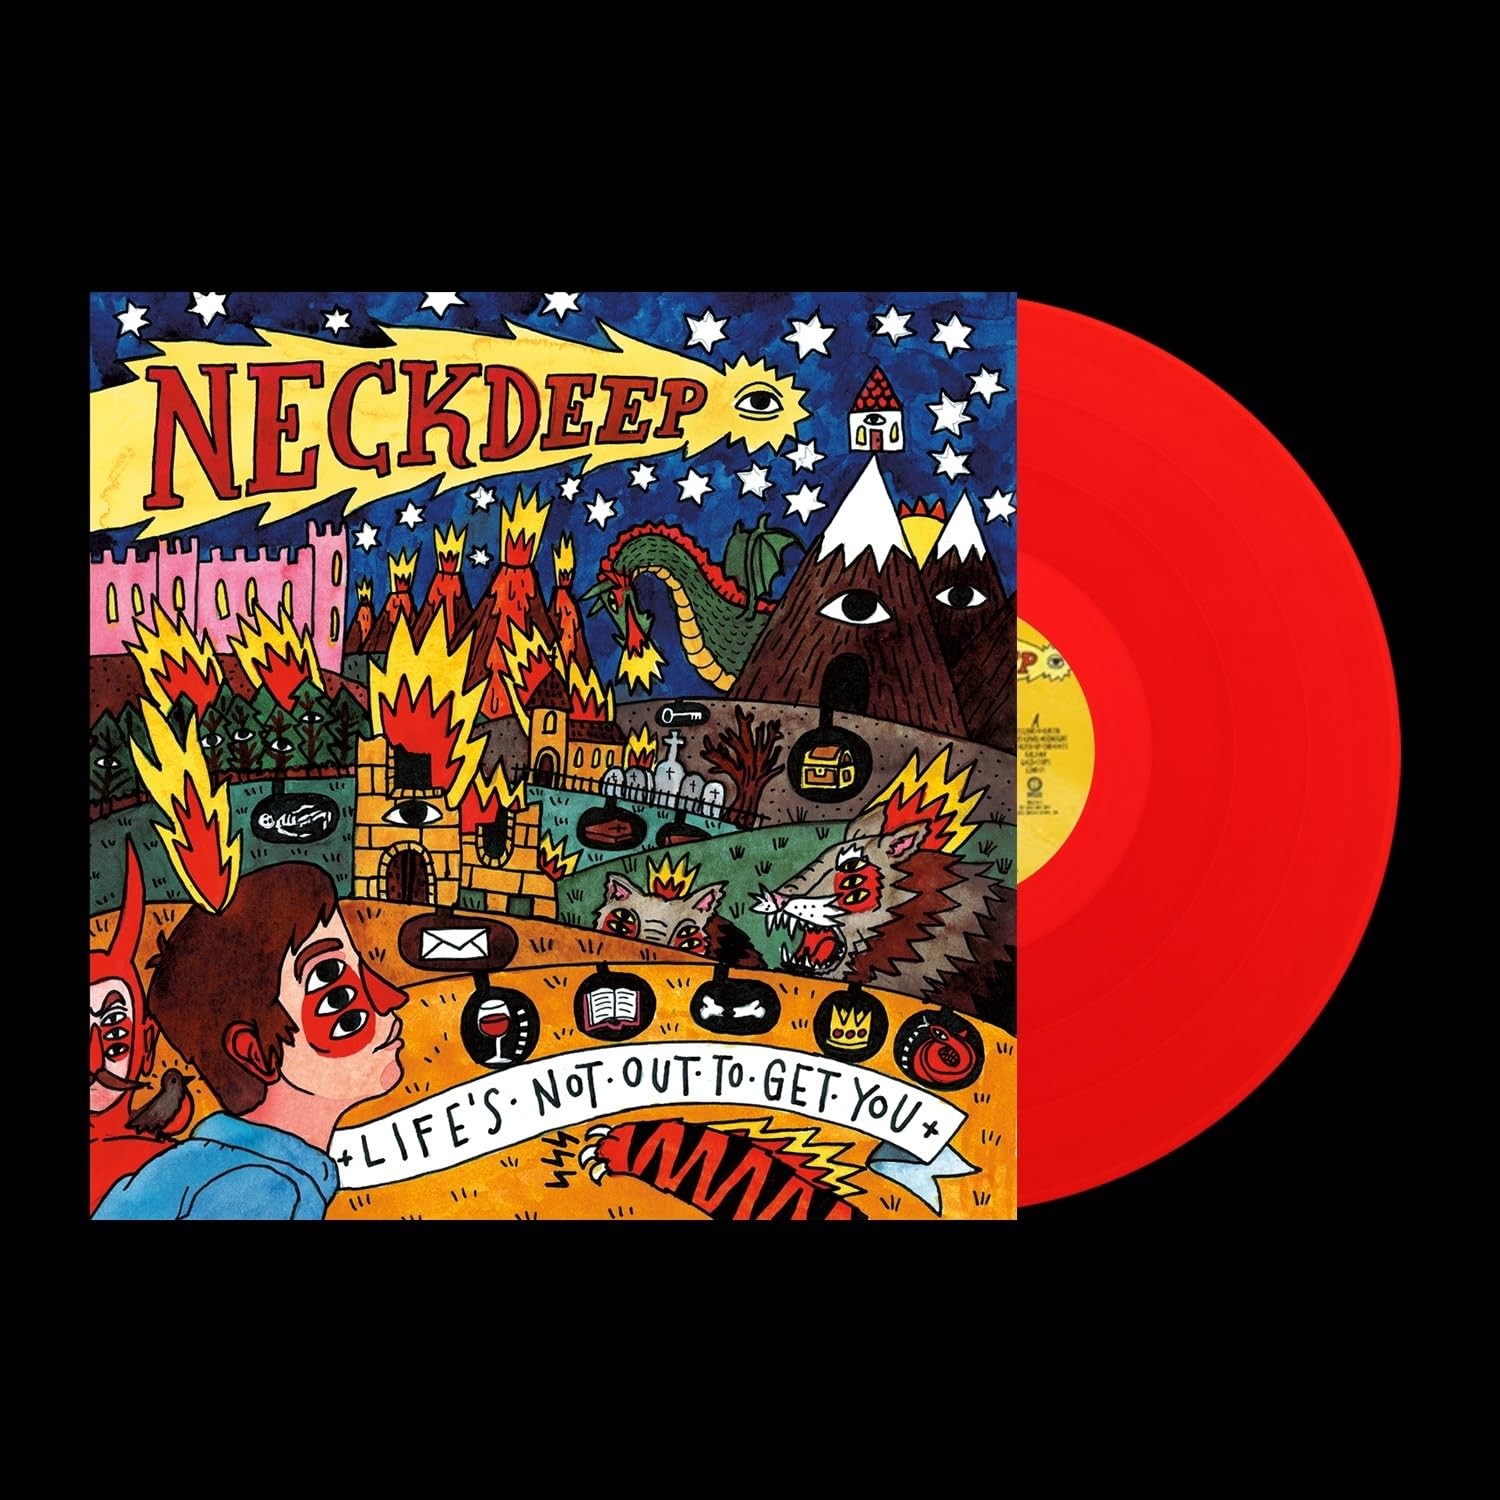 Neck Deep: Life's Not Out To Get You: Blood Red Vinyl LP - Steadfast Records